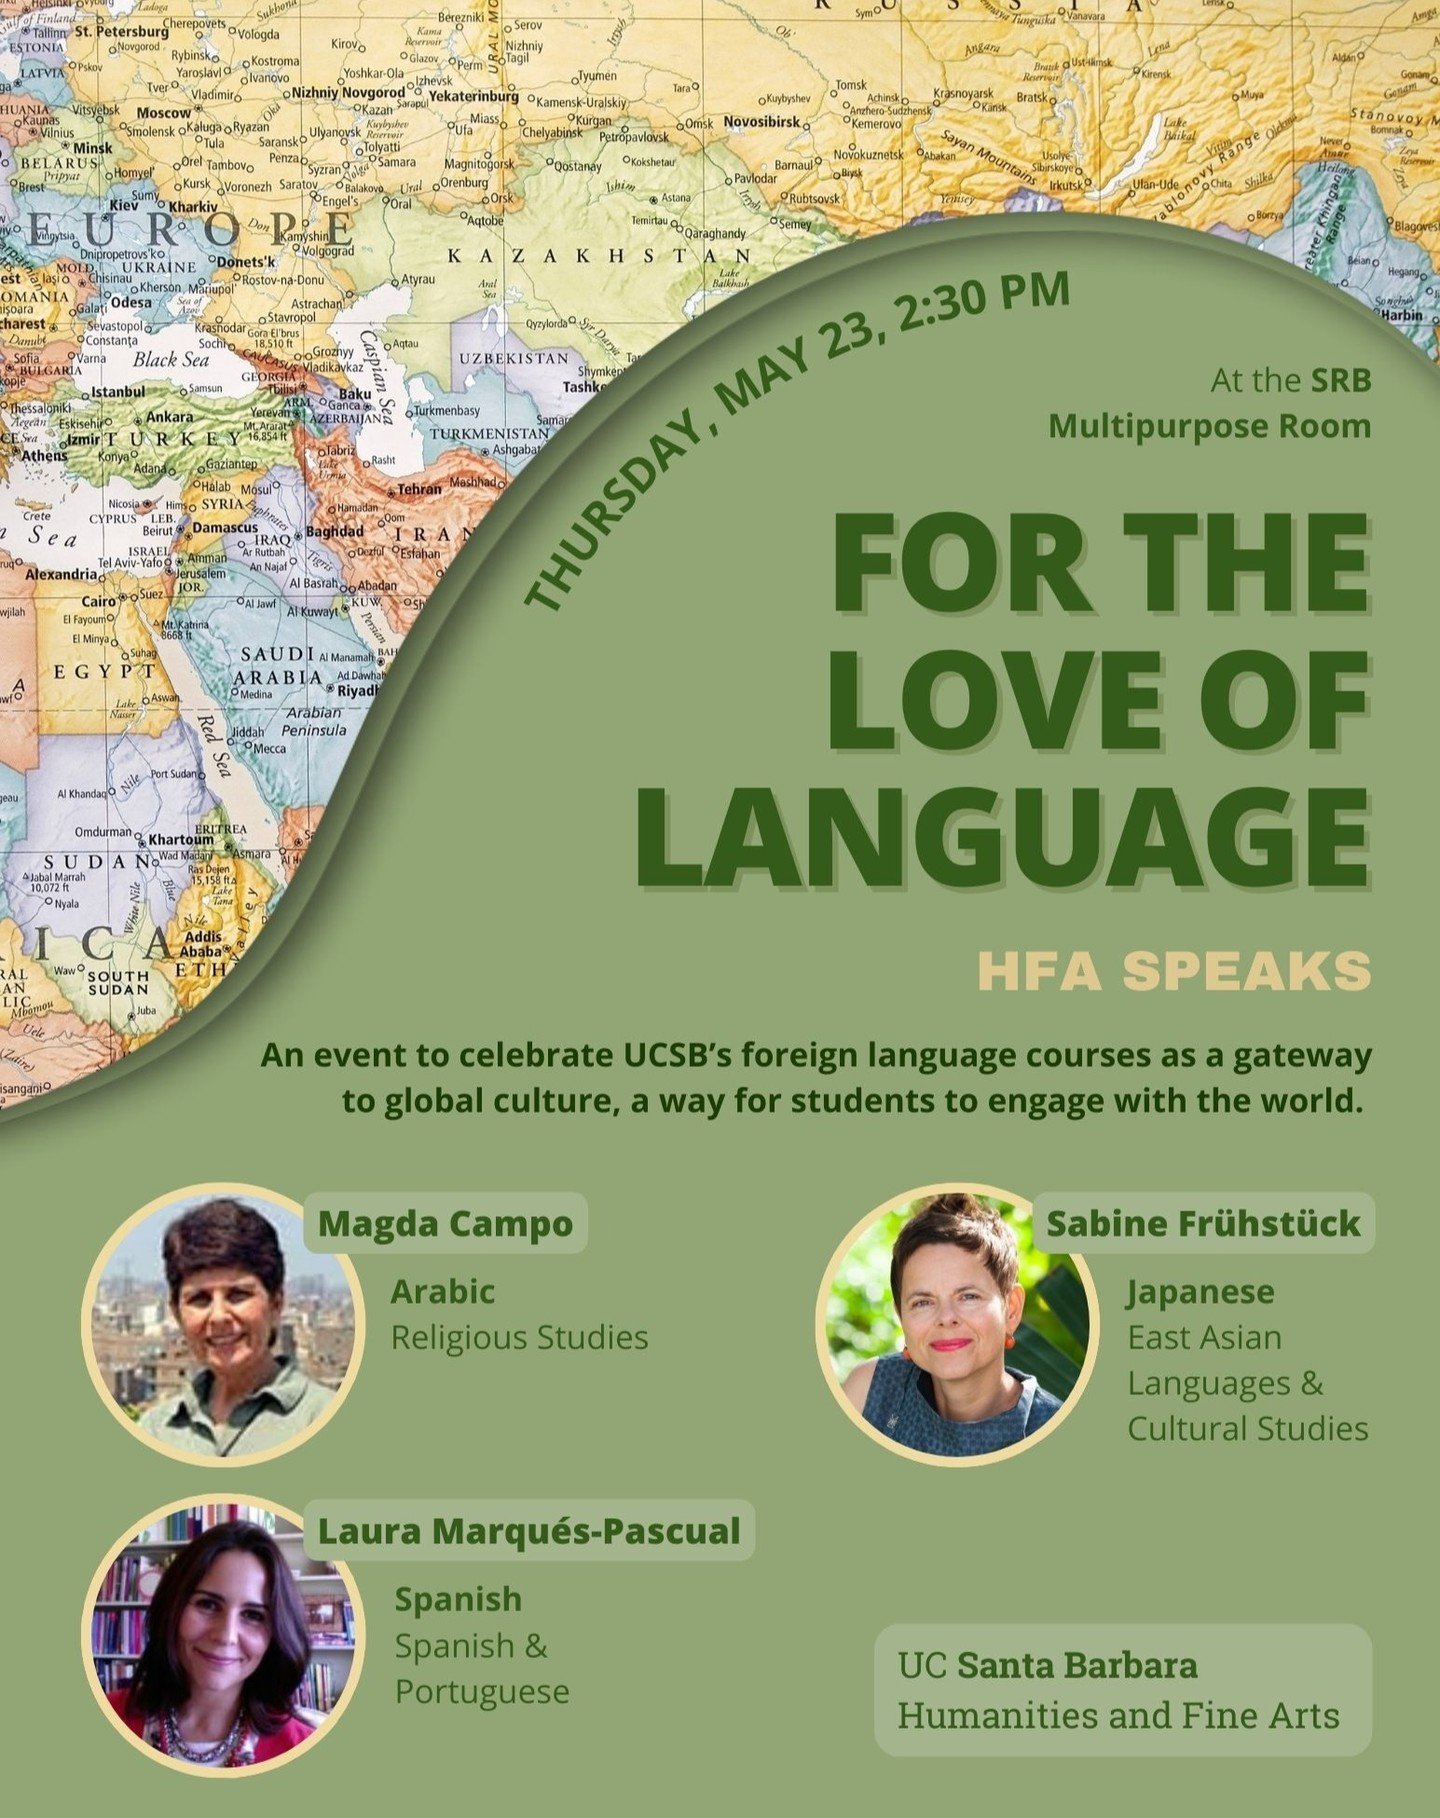 Join an HFA Speaks panel of UCSB foreign language faculty as they discuss the importance of language learning. Led by student moderator Jackie Jauregui, this discussion will delve into how foreign language courses offer a portal to global culture. Th